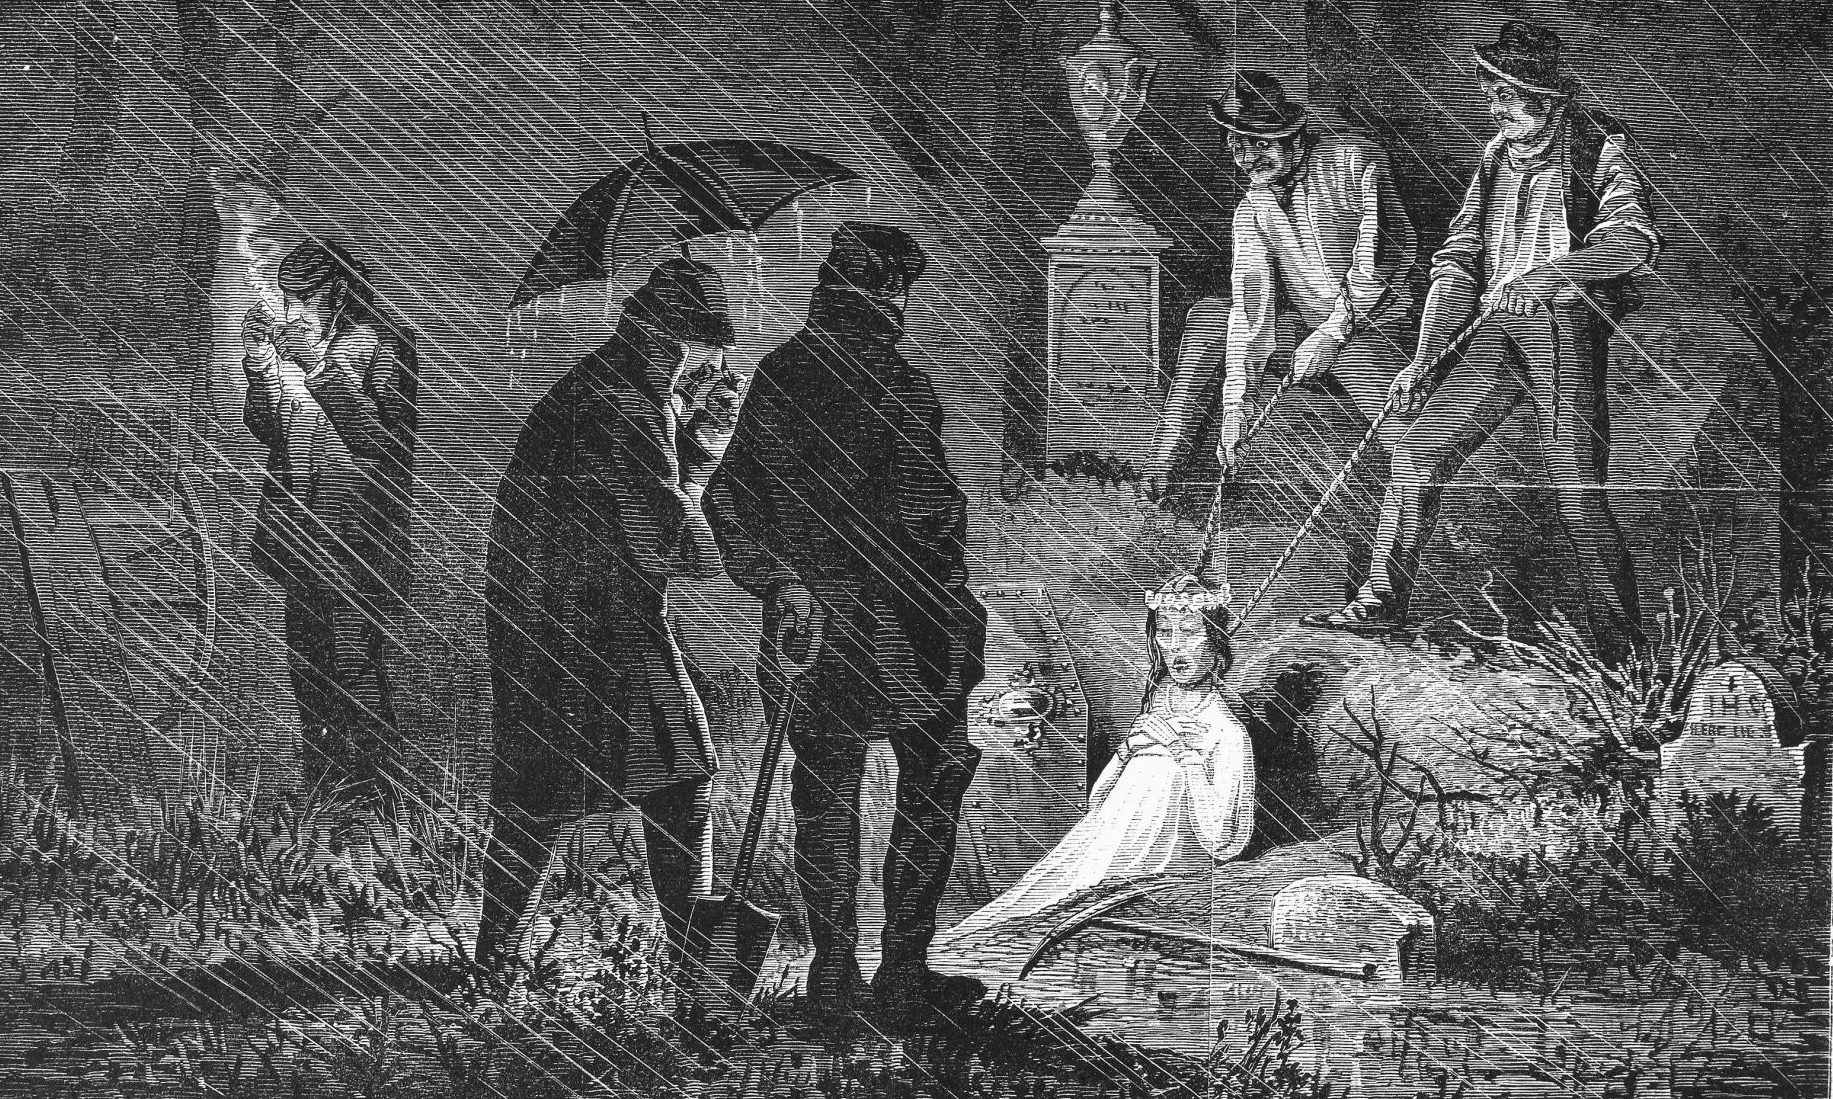 A wood engraving of bodysnatchers at work in 1868.